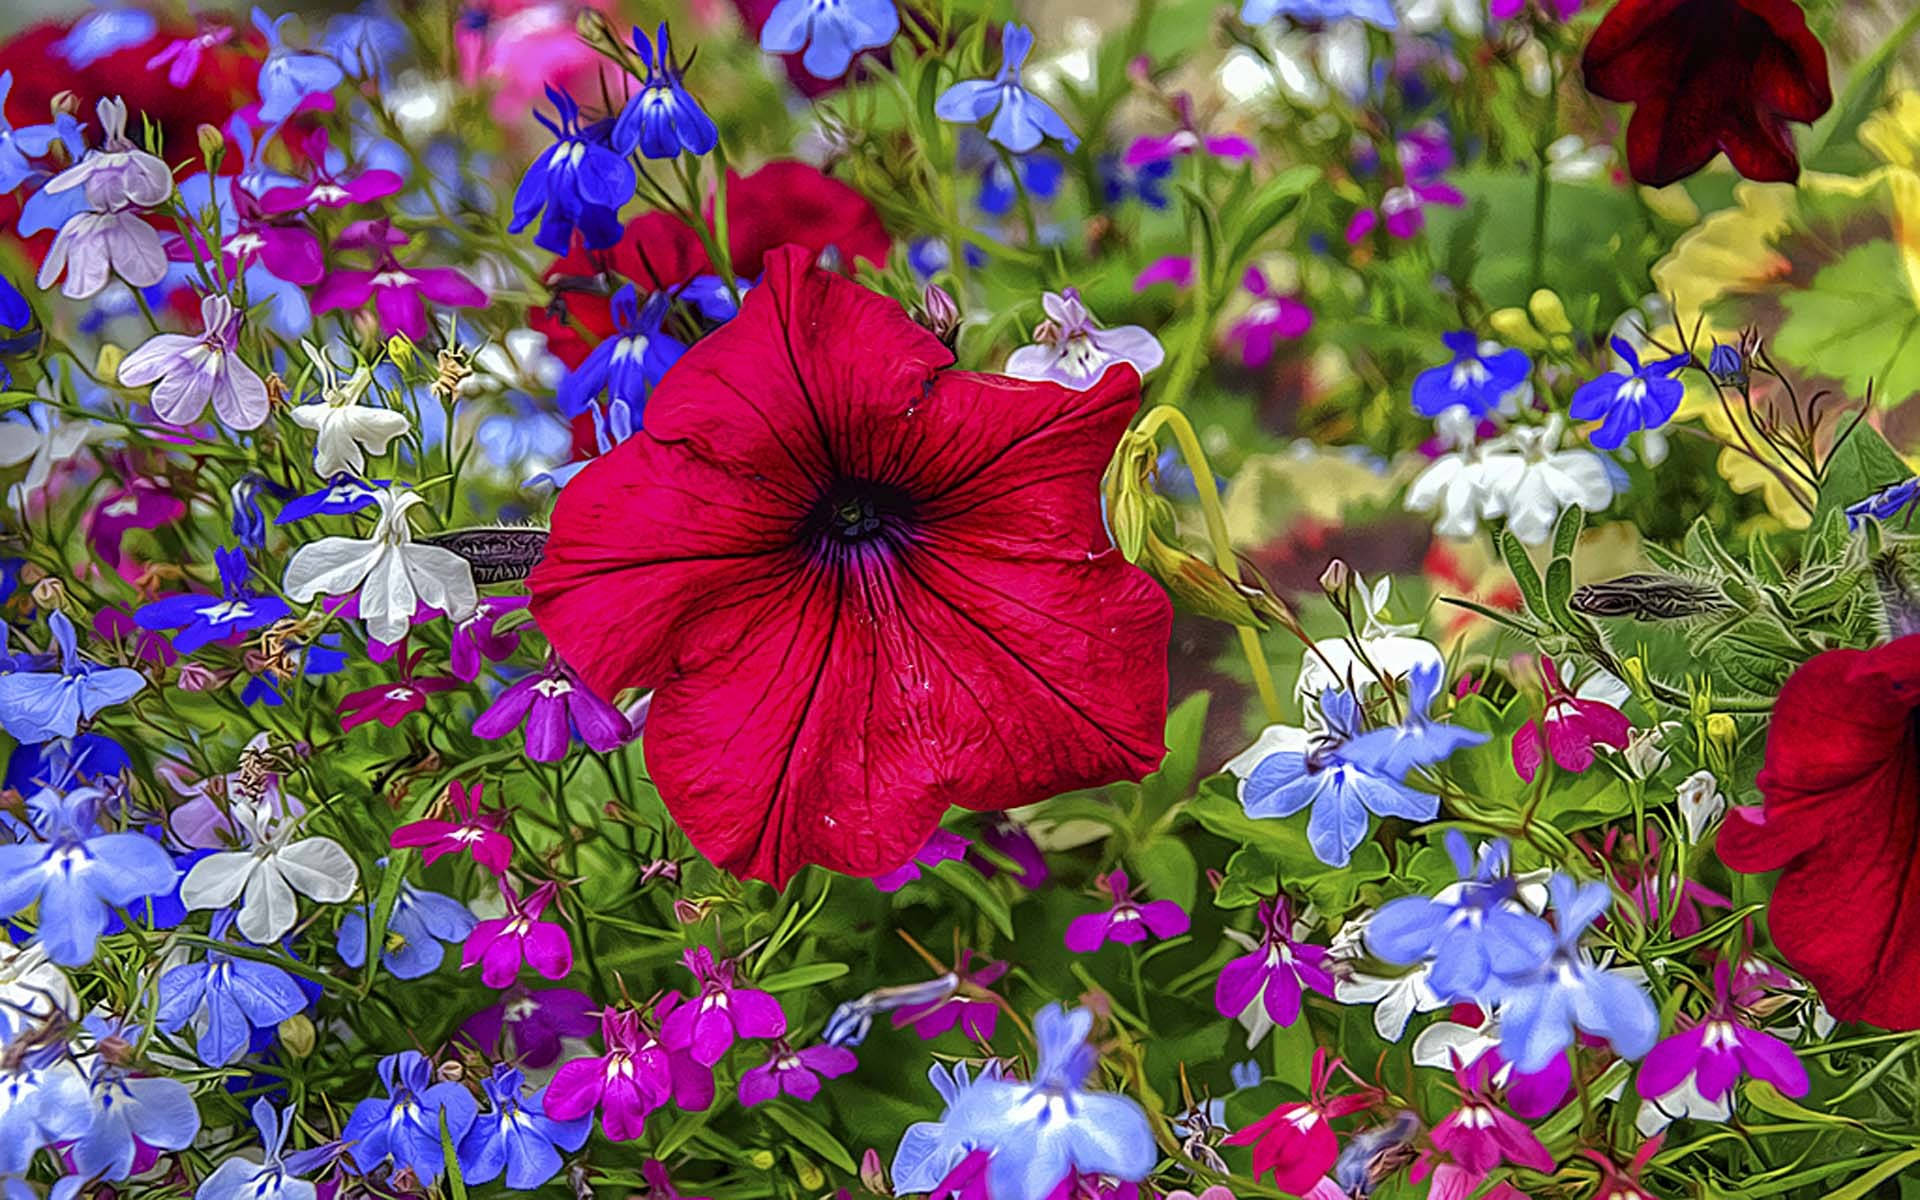 Assorted Colourful Tumblr Flower Wallpaper